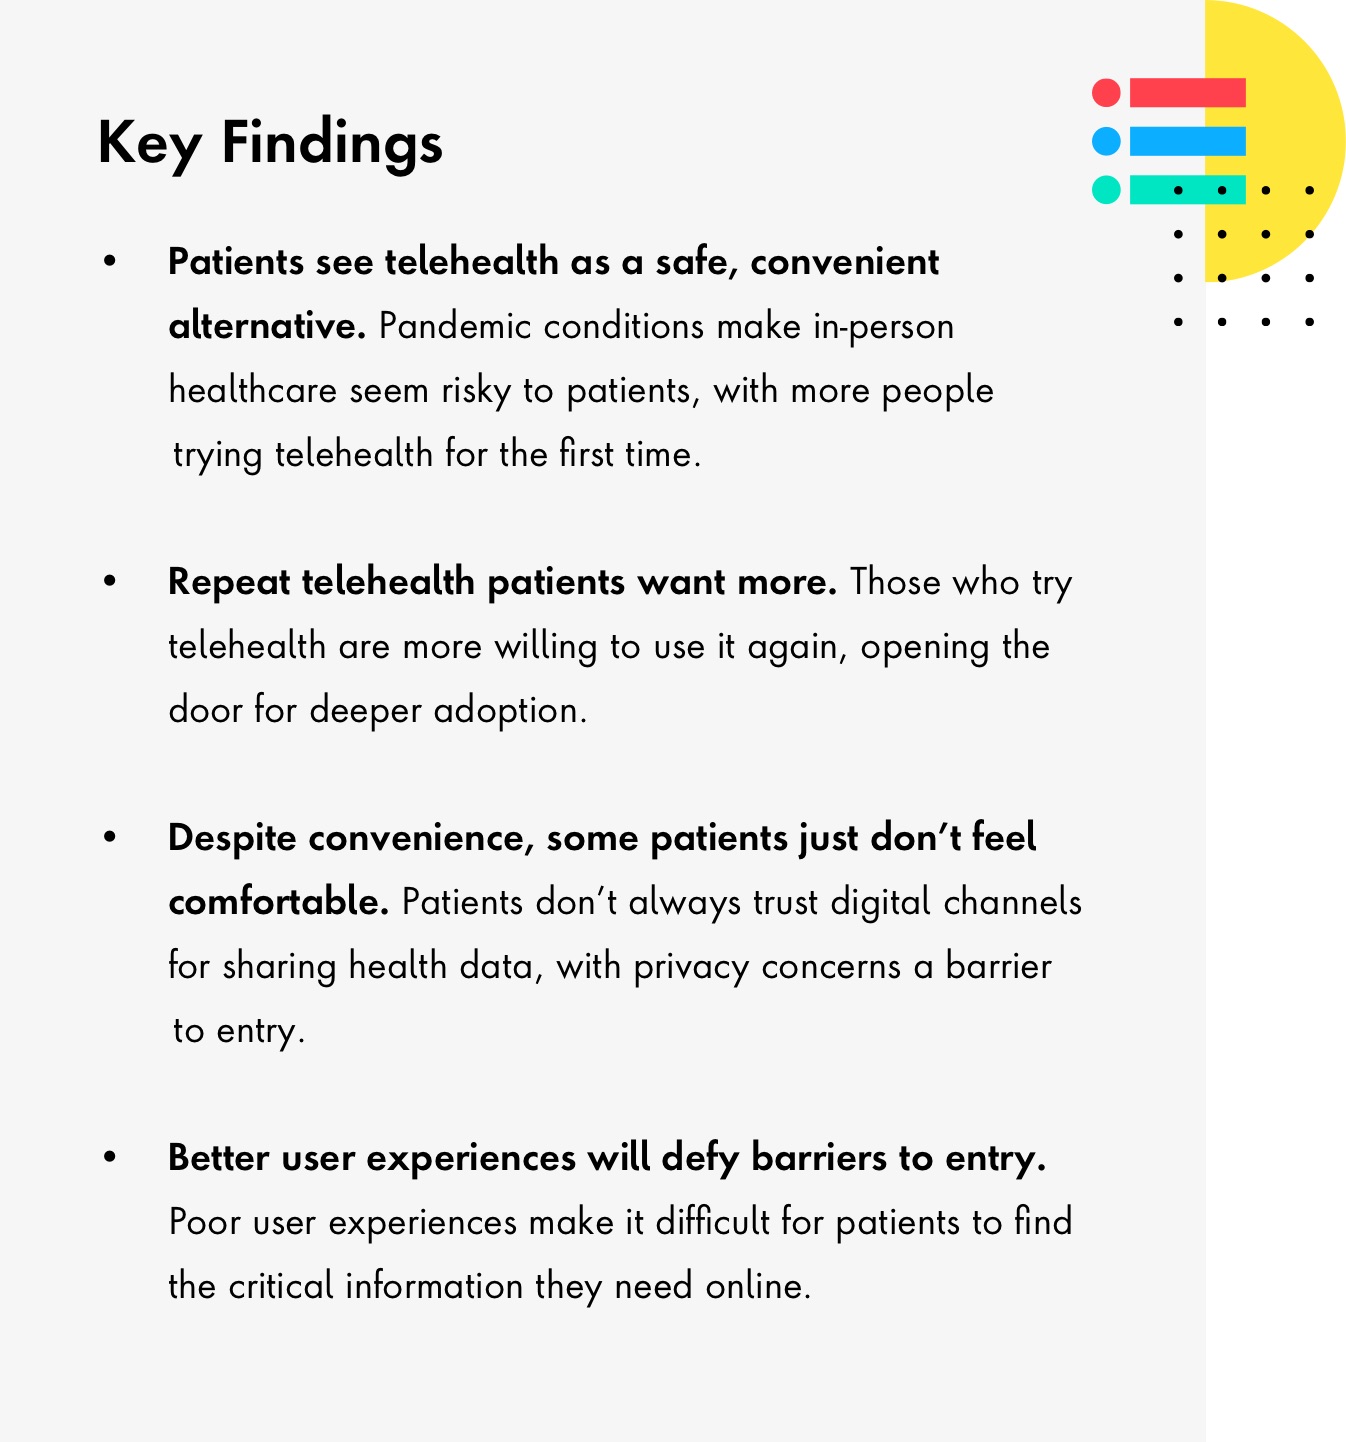 List of Key Findings. 1.Patients see telehealth as safe and convenient. 2. Repeat telehealth patients want more. 3. Despite convenience, some patients just dont feel comfortable. 4. Better user experiences will defy barriers to entry